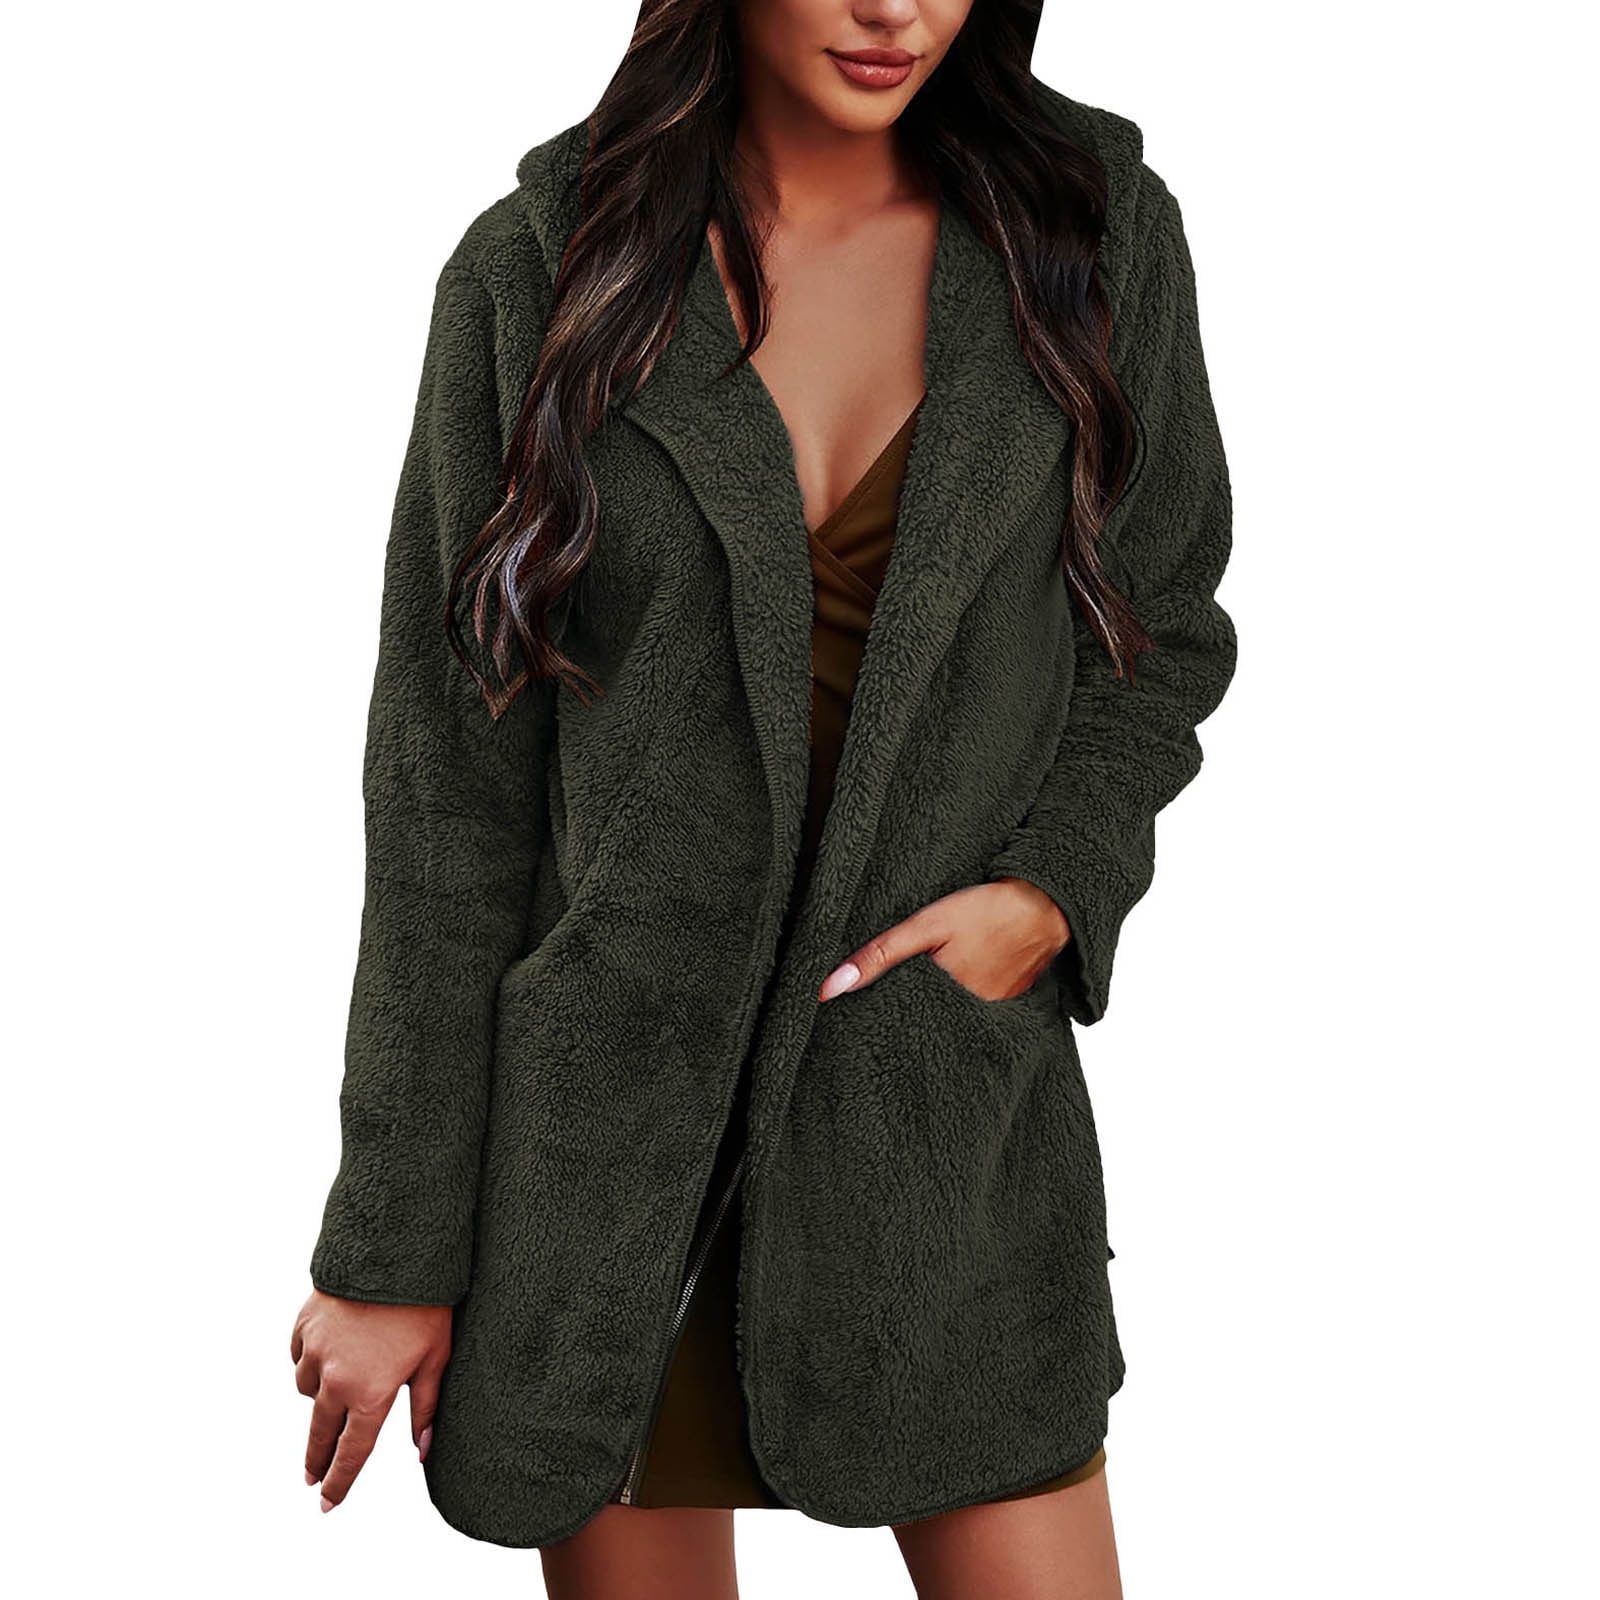 Qepwscx Outerwear For Women Womens Coats Women'S Autumn/Winter Solid Color  Lapel Long Sleeve Cardigan Plush Hooded Jacket Tops Clearance